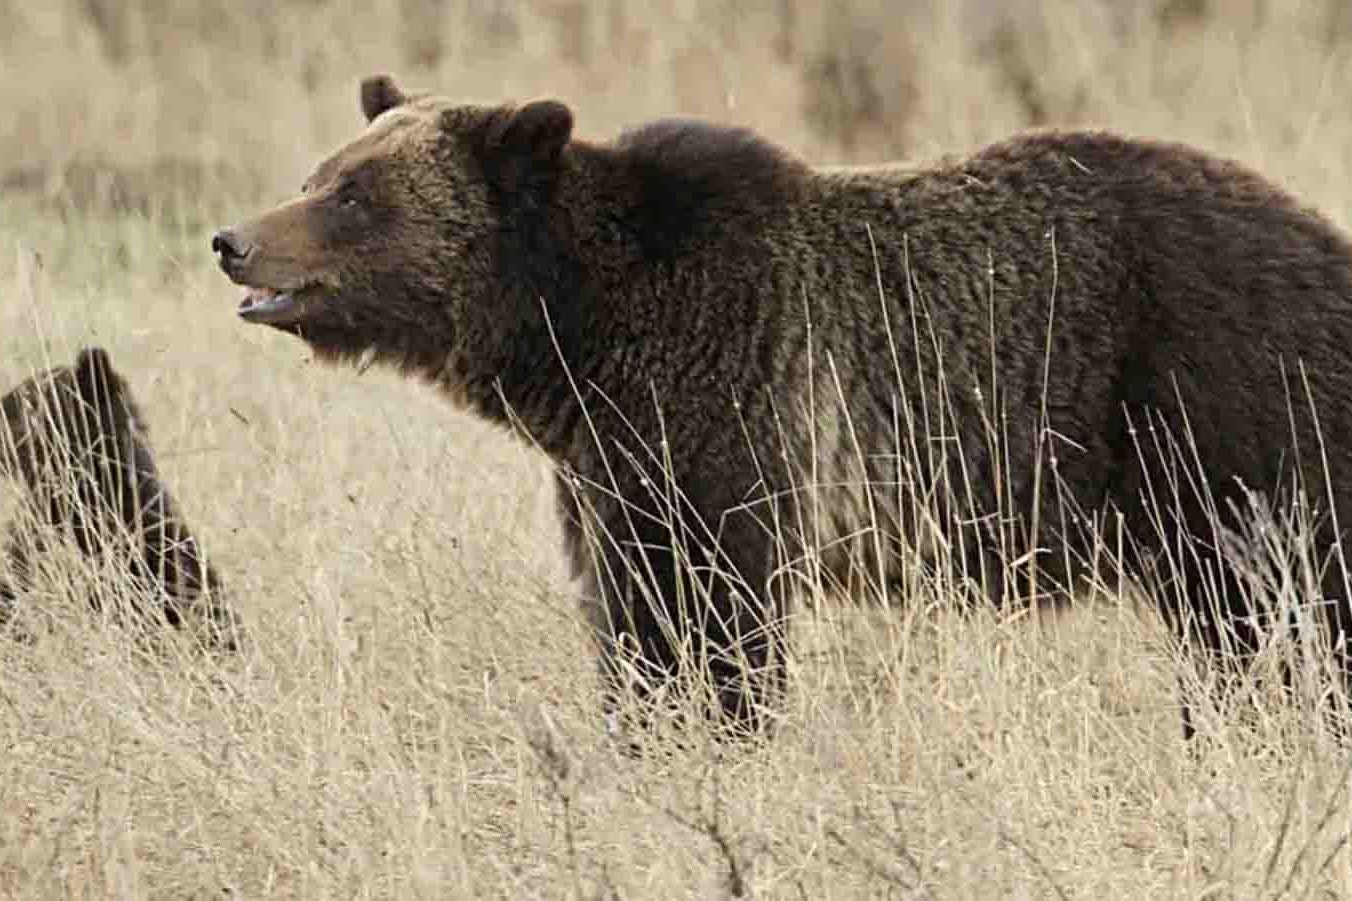 A sow grizzly and her cub pause while strolling through grassland in Wyoming.